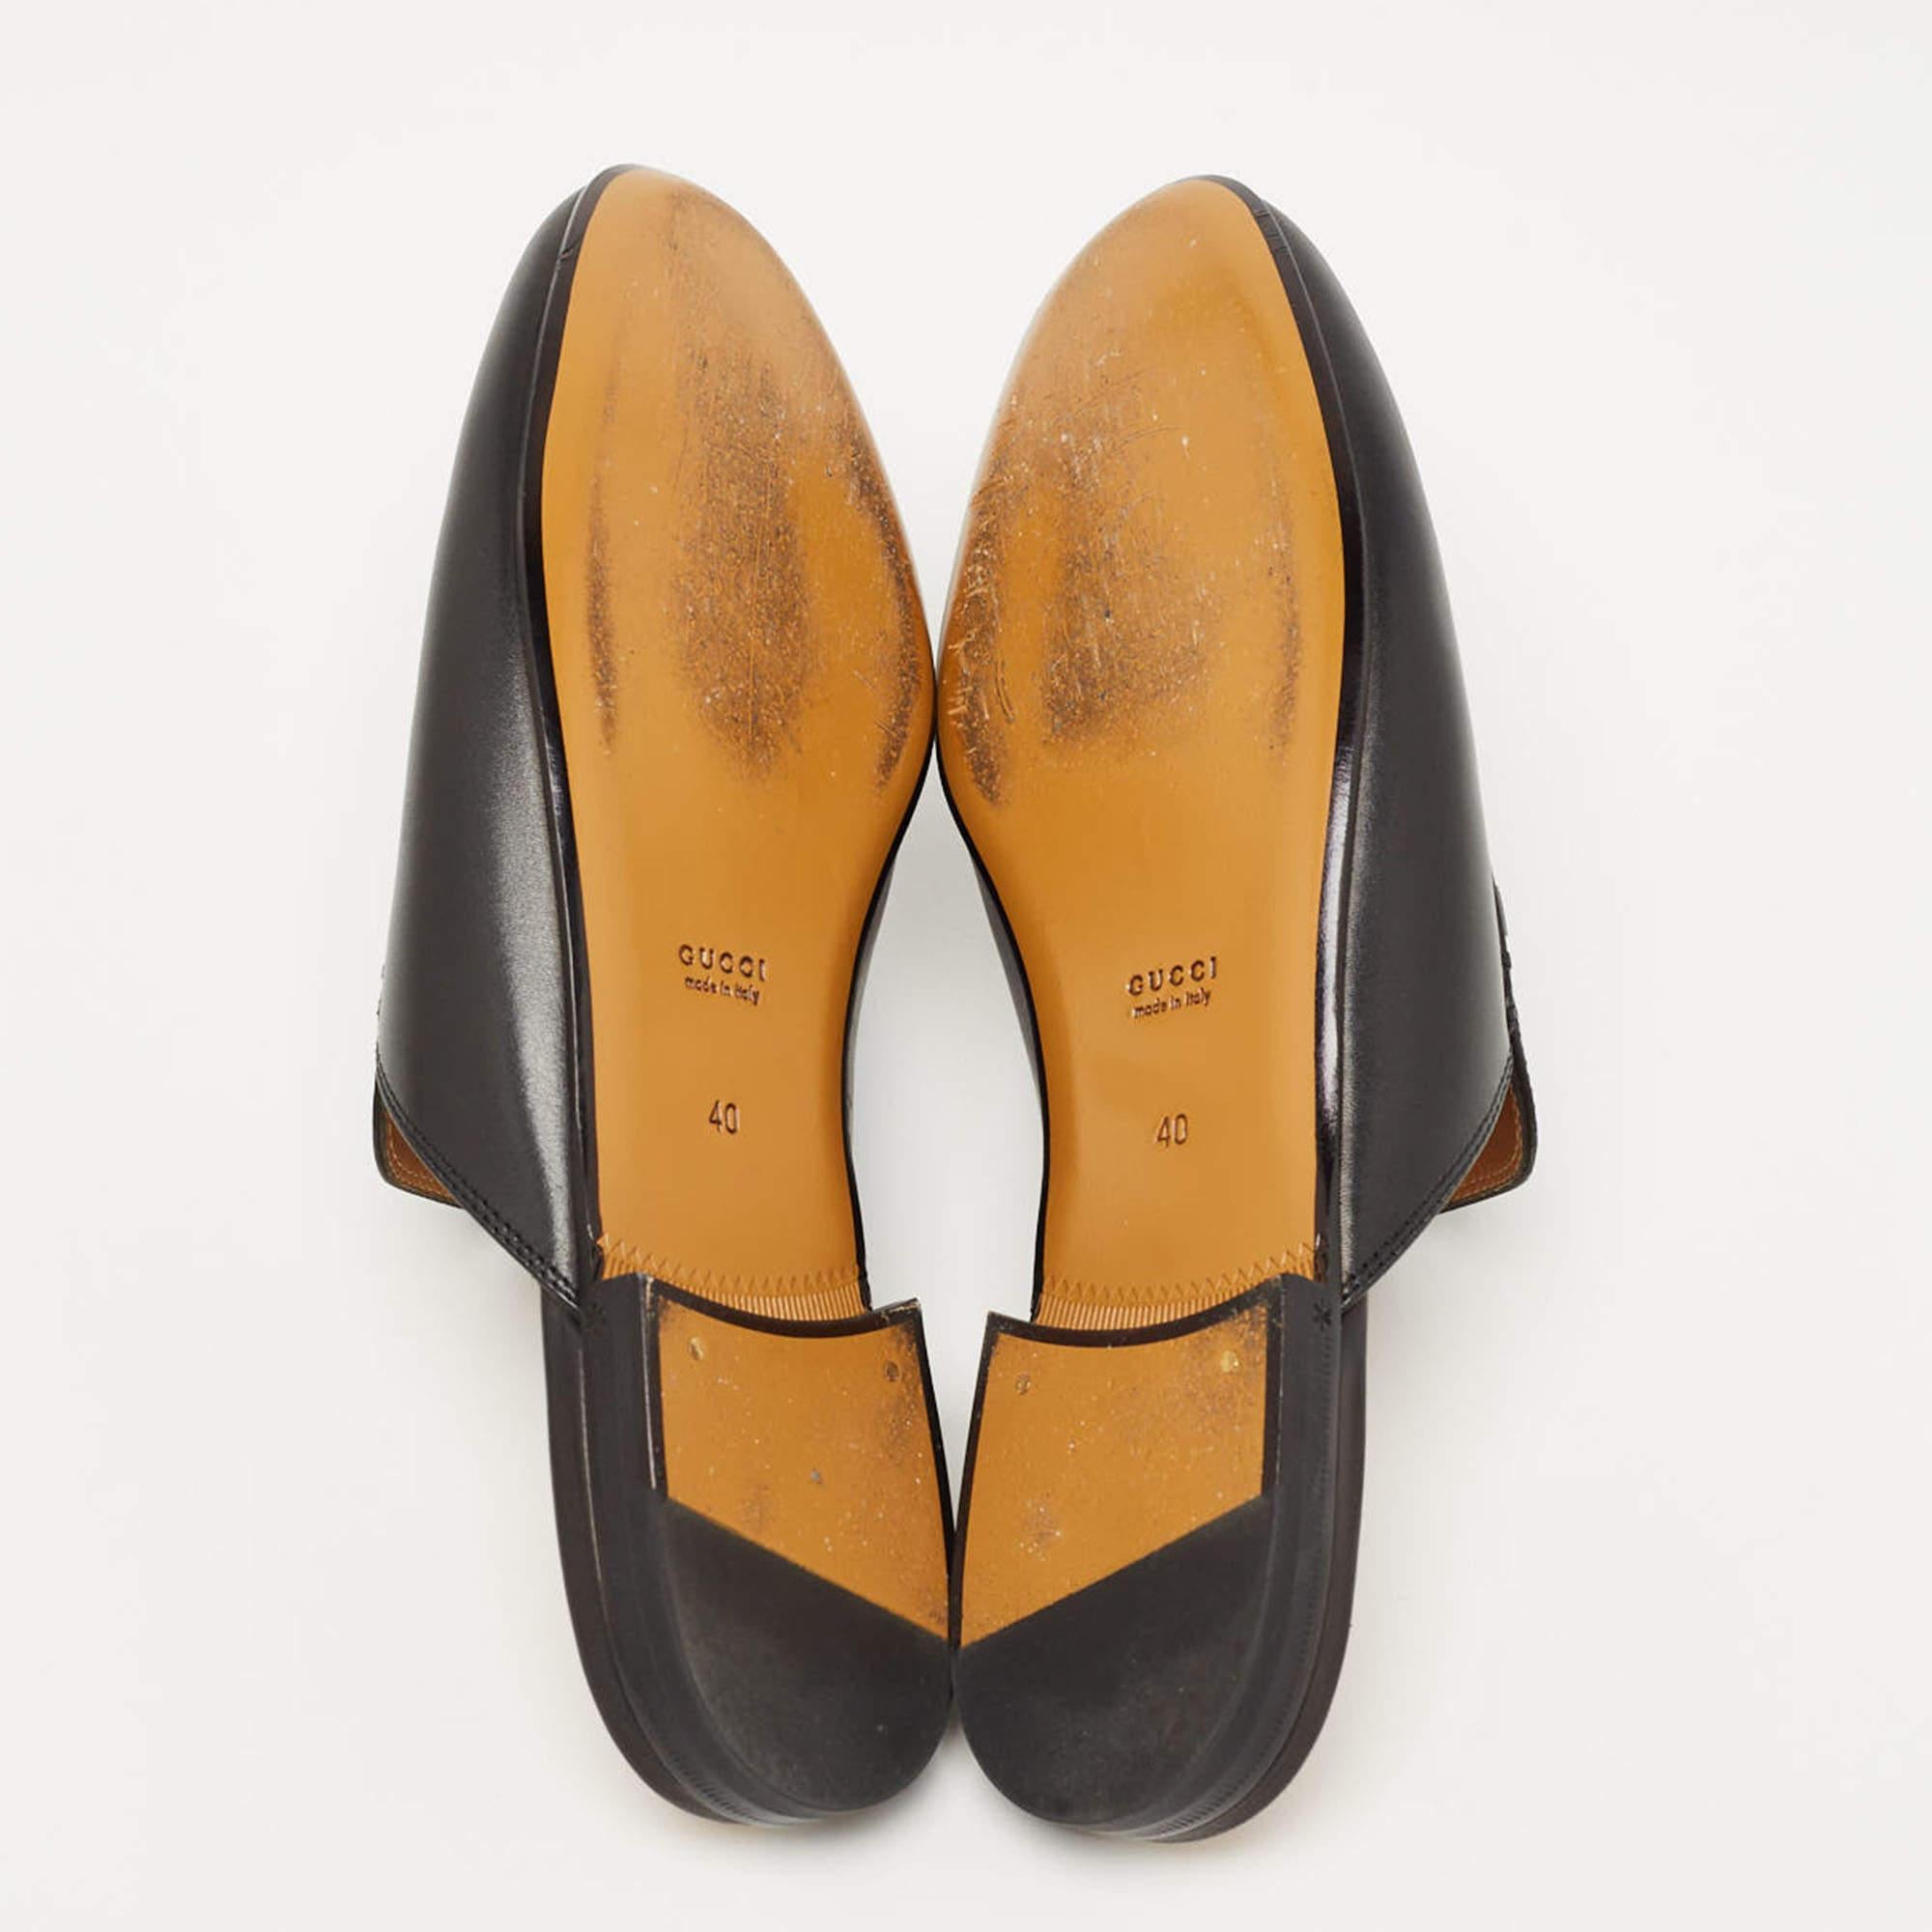 Gucci Black Leather Princetown Flat Mules Size 40 3